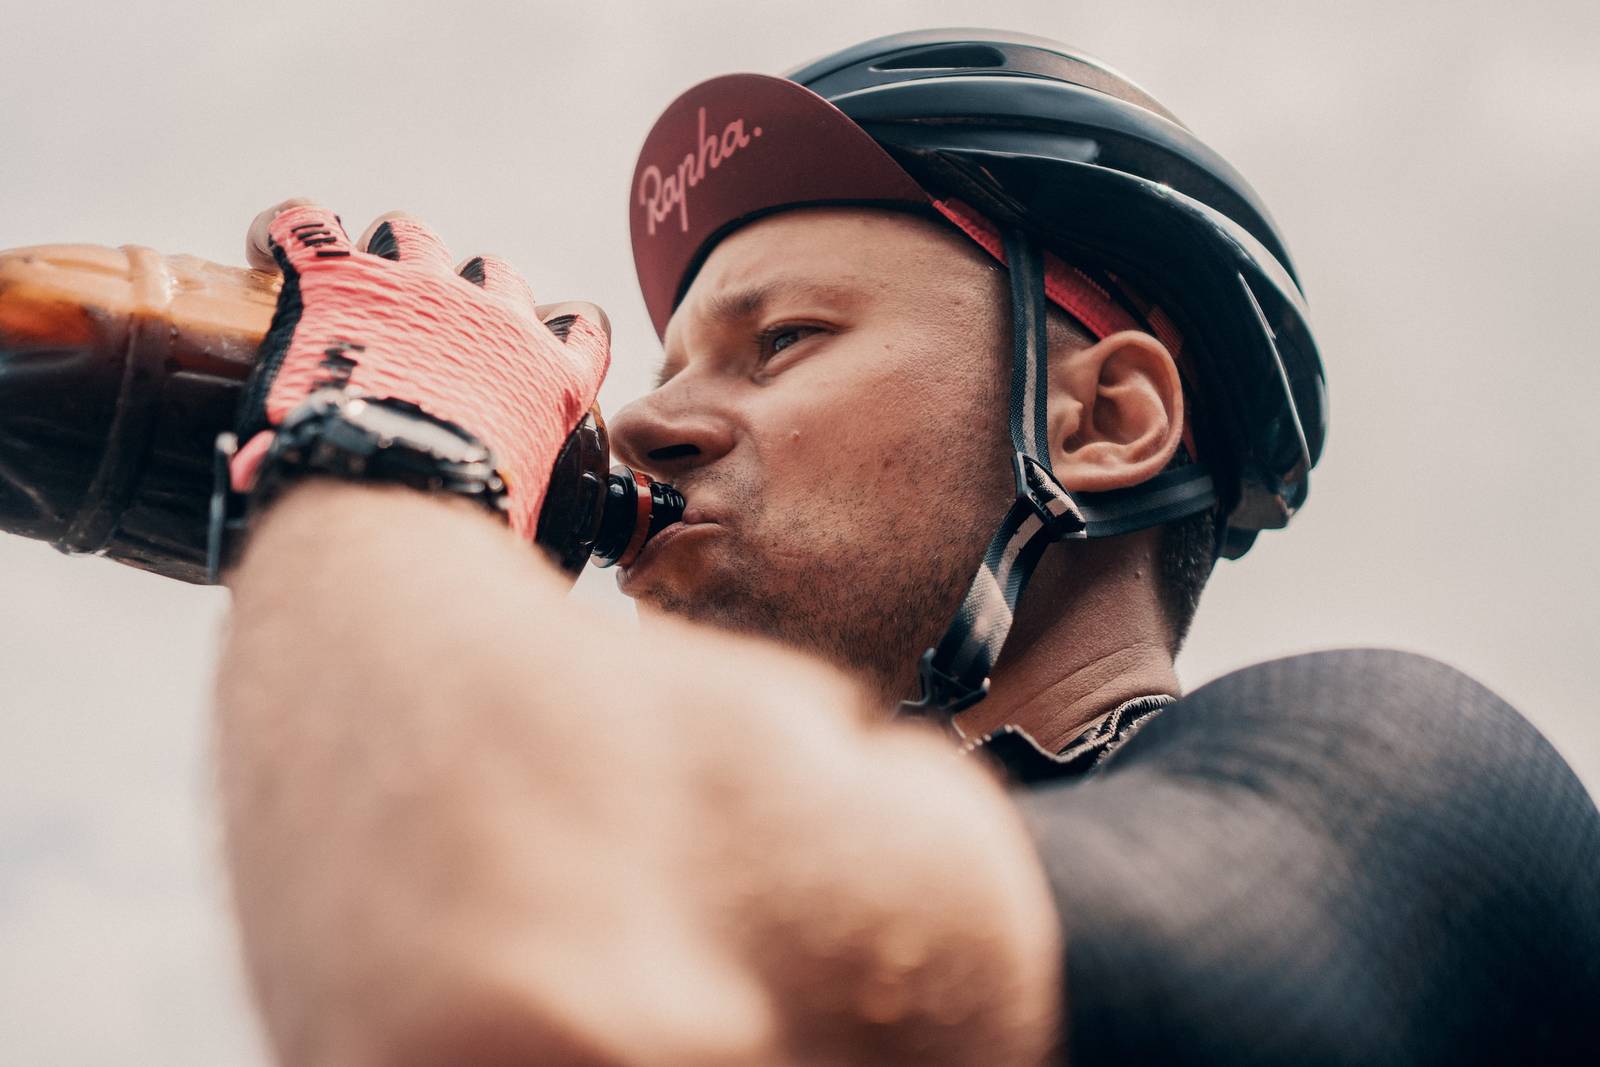 Photo of cyclist drinking from a water bottle by Viktor Bystrov via Unsplash